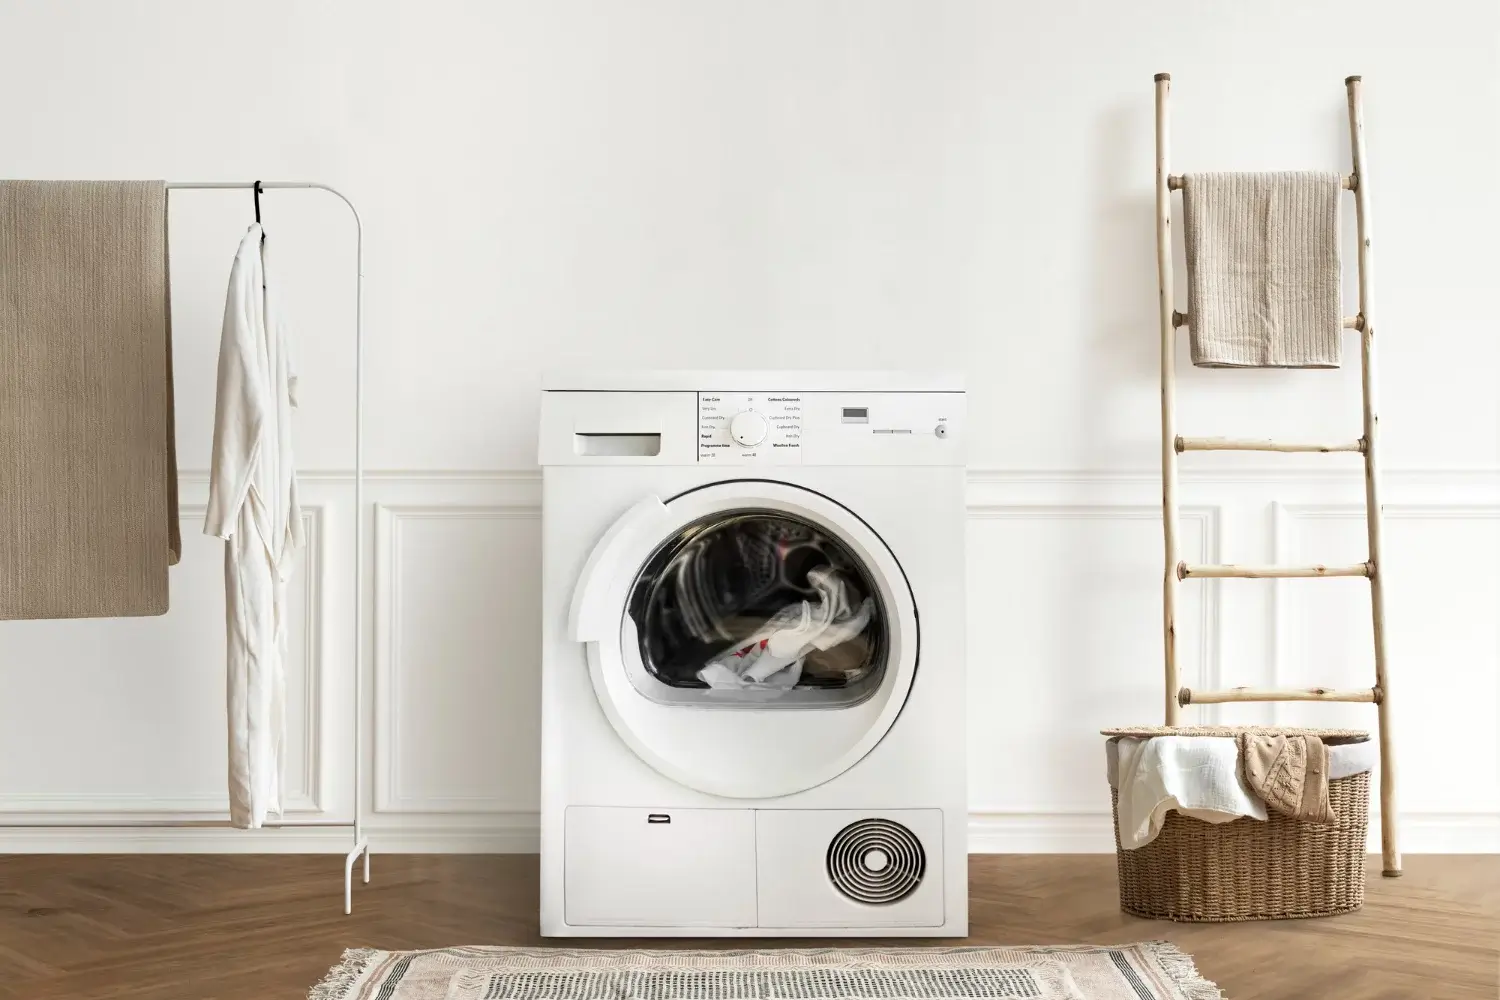 Choosing a Washing Machine: The Pros and Cons of Old vs. New Models